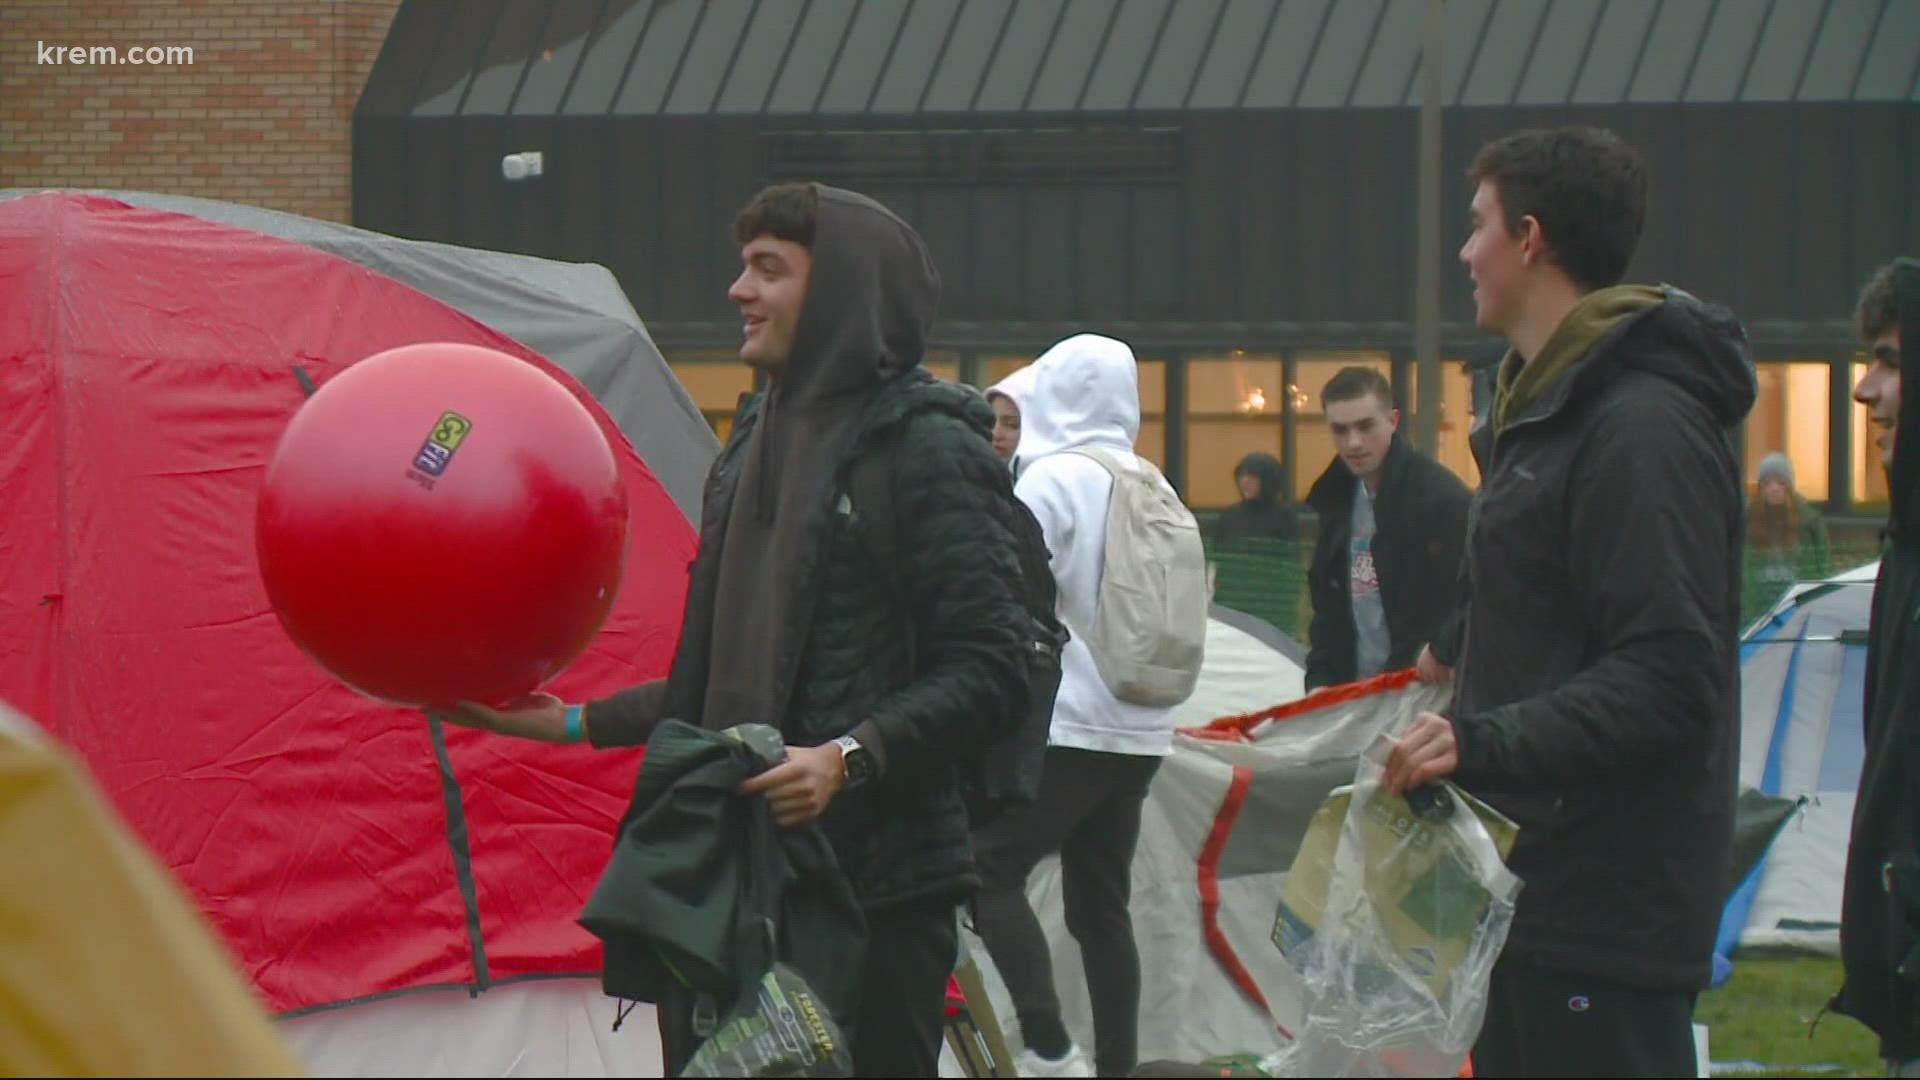 Students weathered the elements to get their tickets to Gonzaga vs. Texas